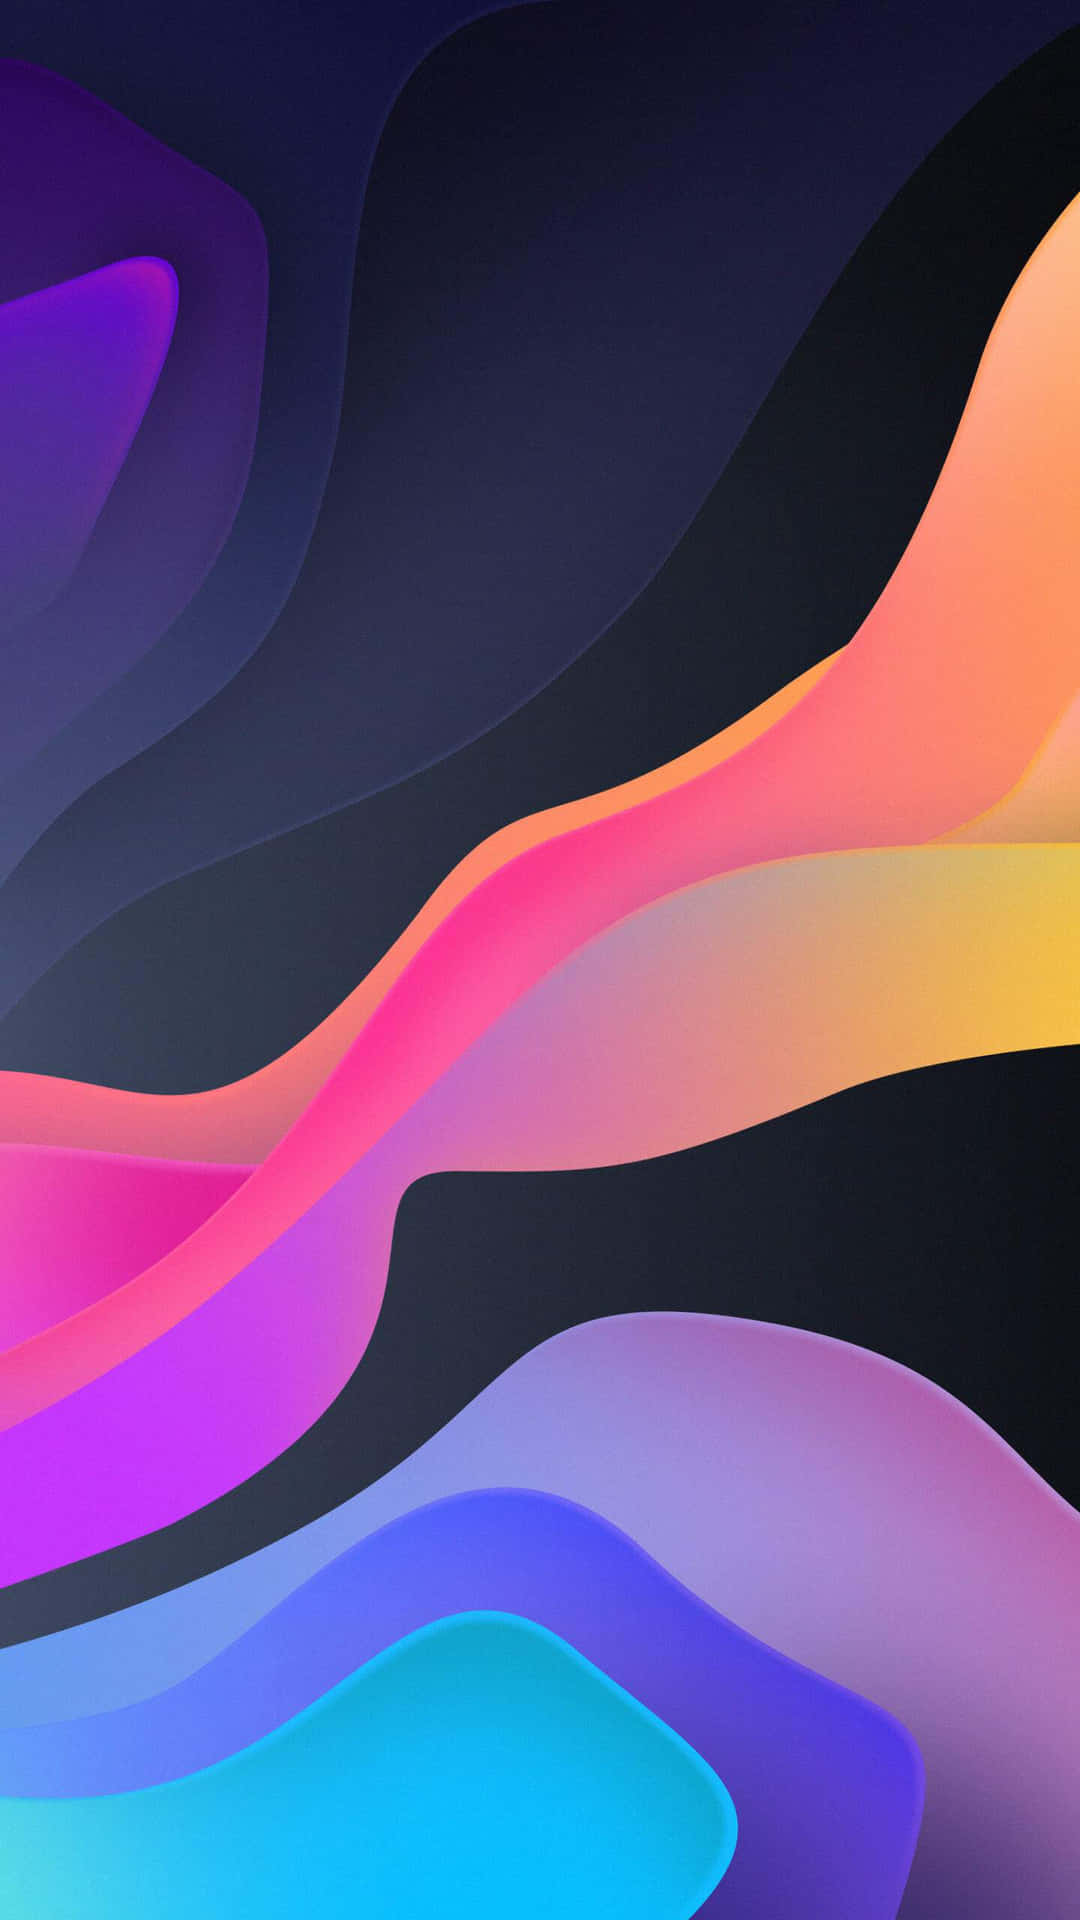 A Colorful Abstract Background With A Rainbow Of Colors